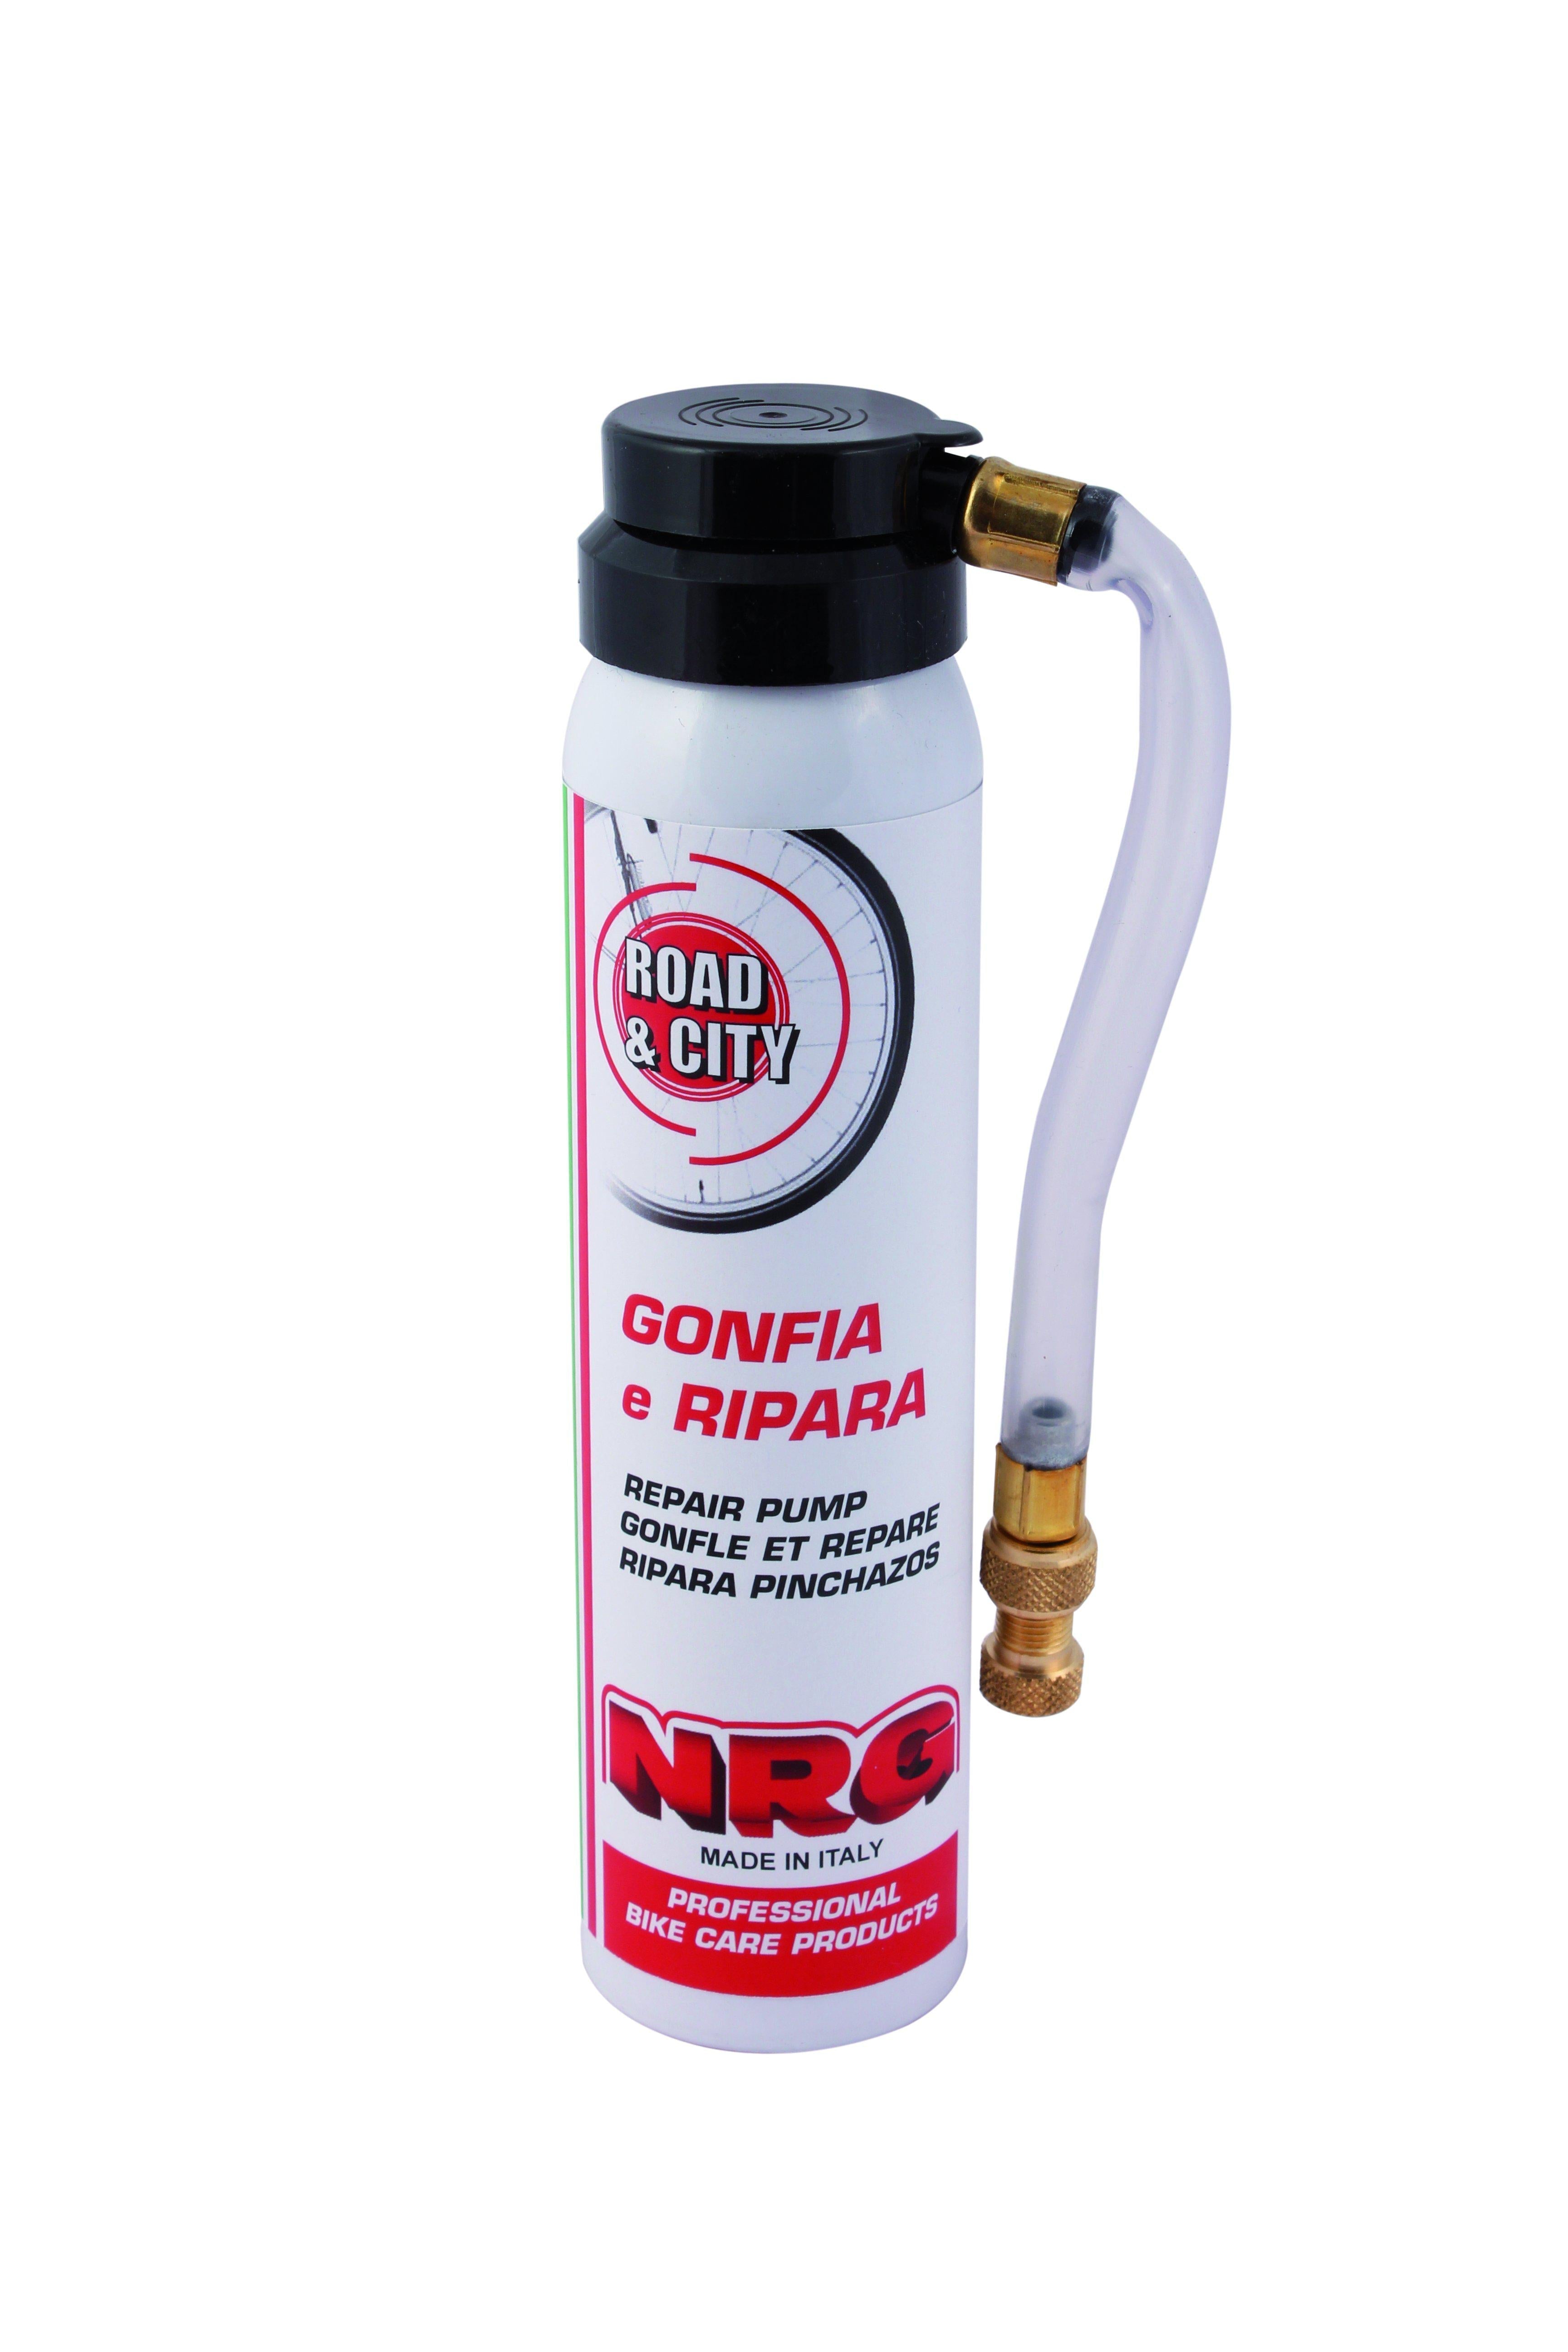 NRG-Tyre Inflate & Repair With Sealant-Standard Road & City Alliance Auto Products